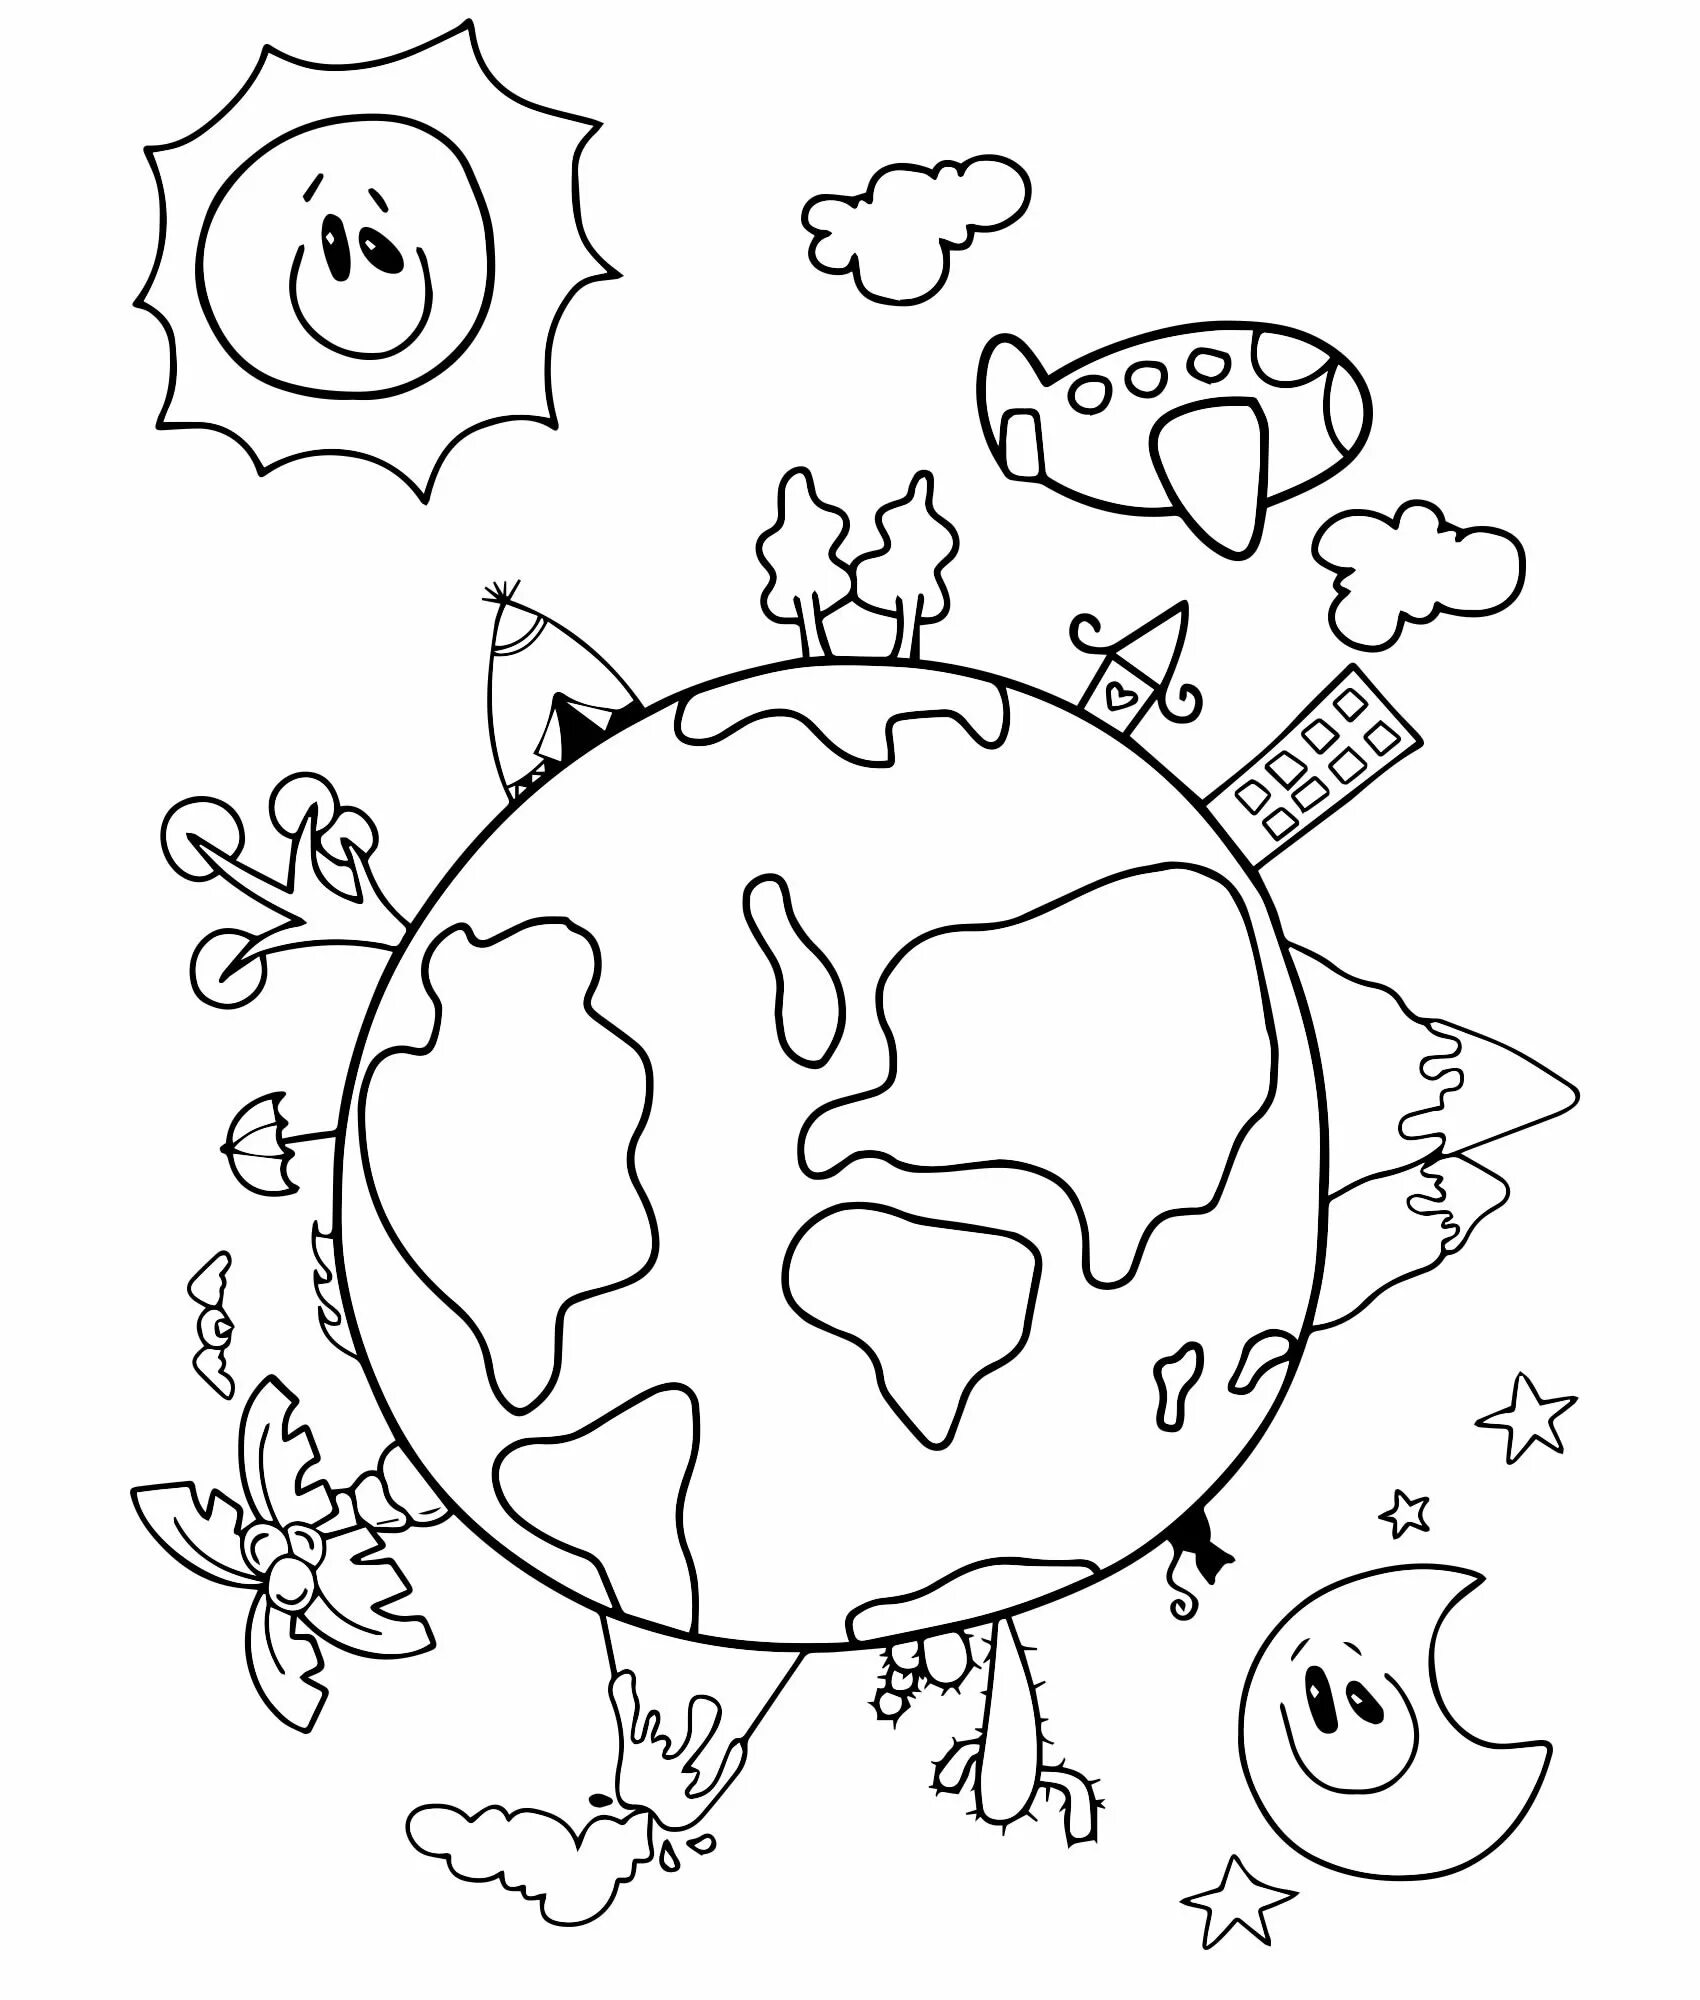 About peace on earth through the eyes of children #8